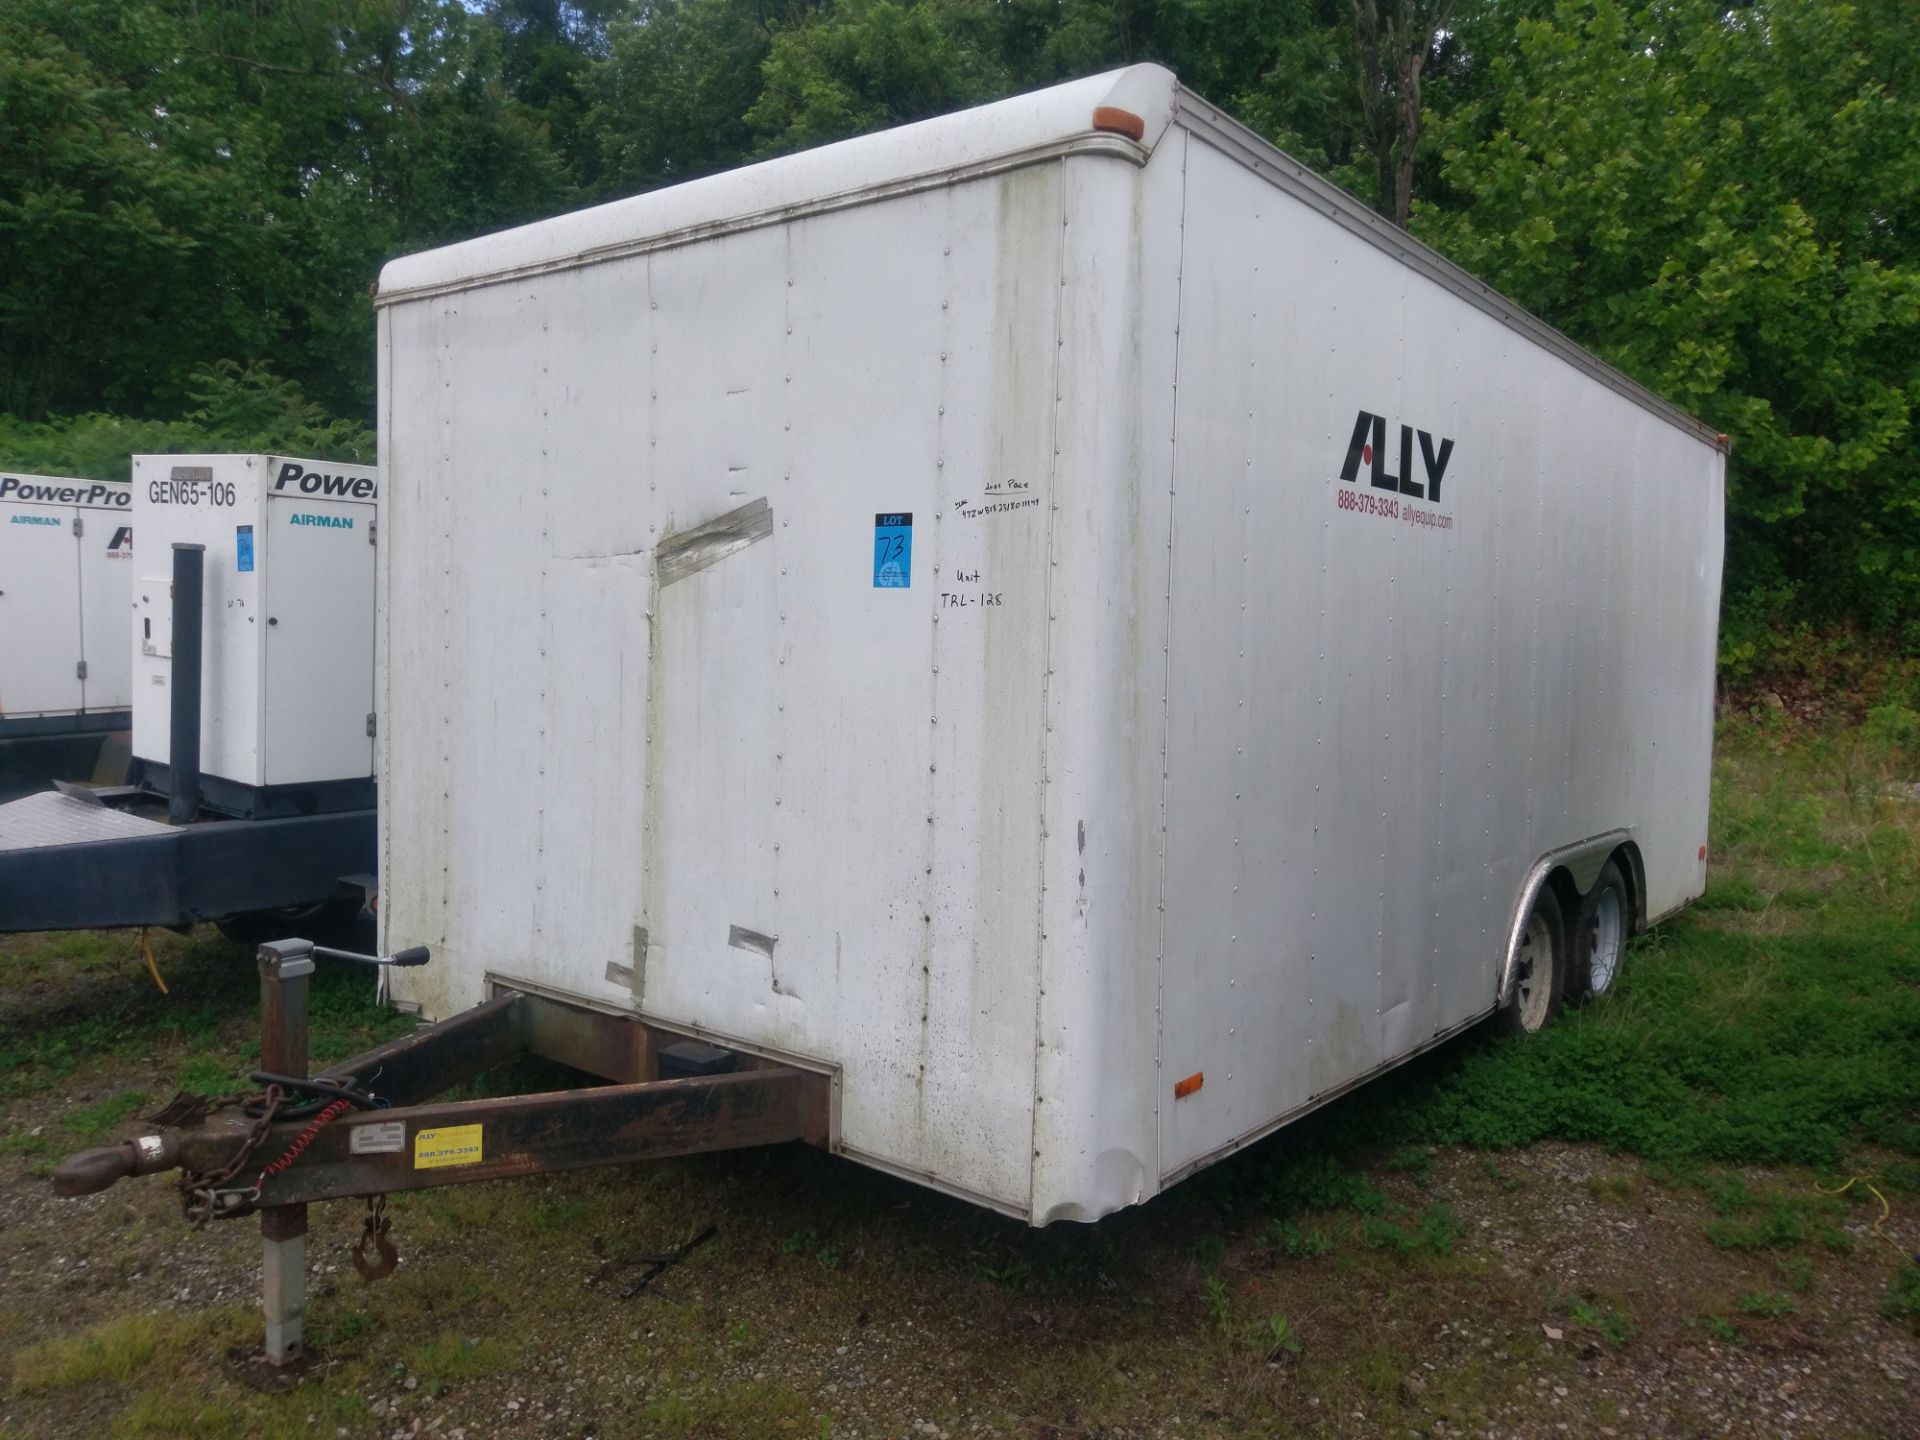 2001 PACE TANDEM AXLE ENCLOSED TRAILER; VIN # 47ZWB18231X011149, BALL HITCH, 8' X 18', REAR FOLD